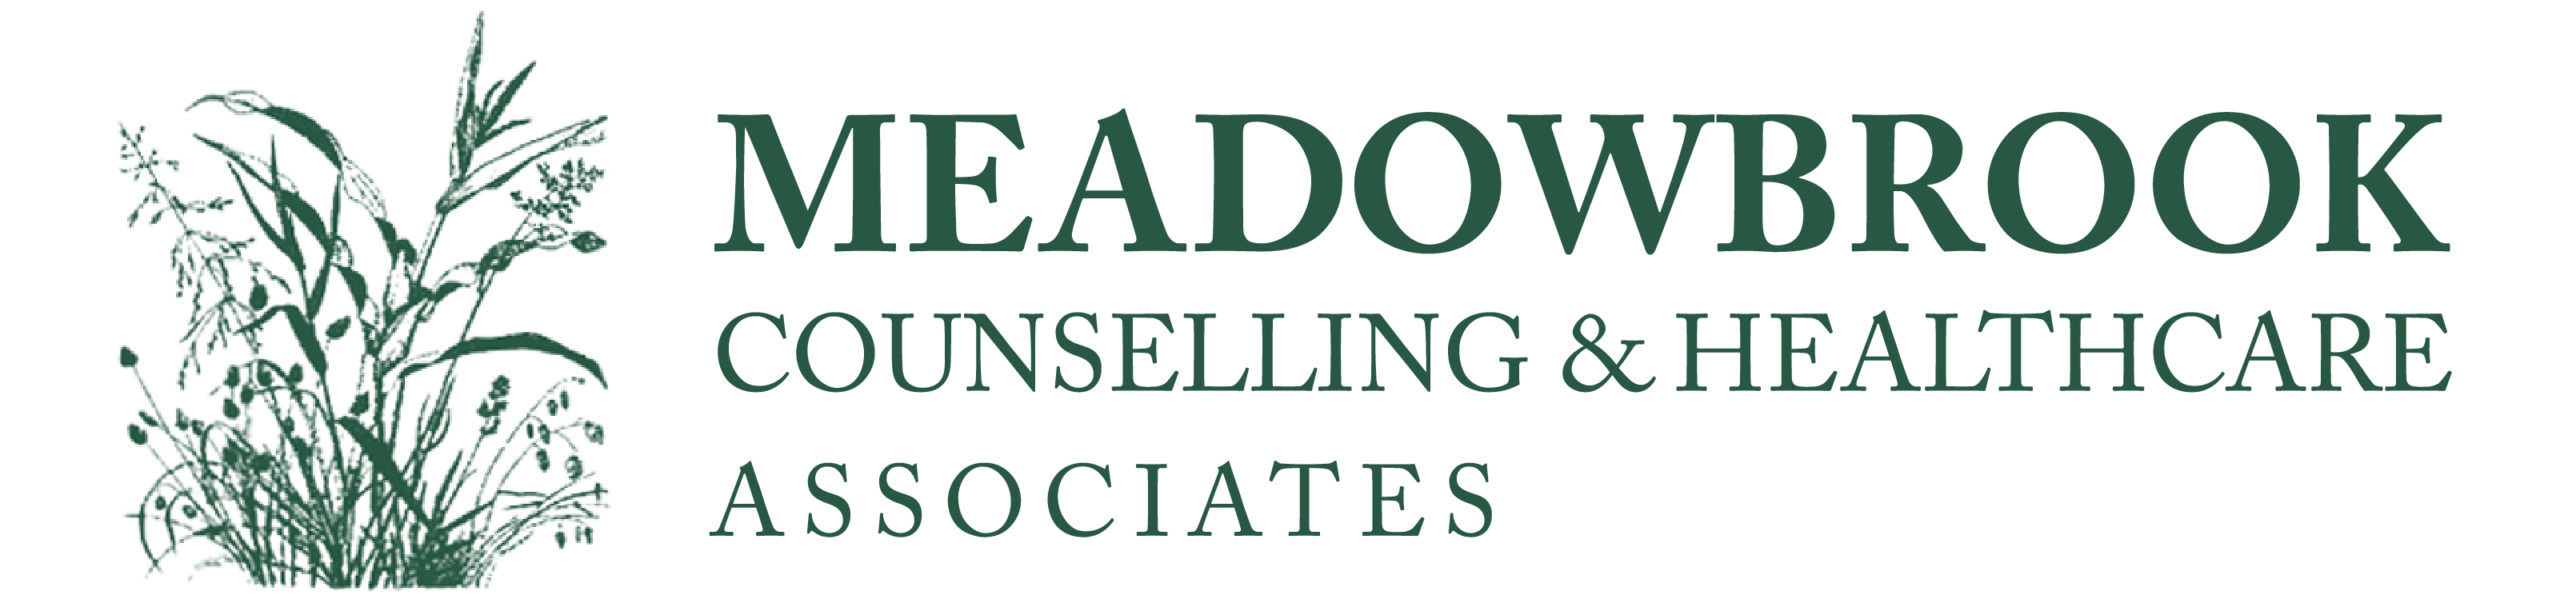 Meadowbrook Counselling Associates